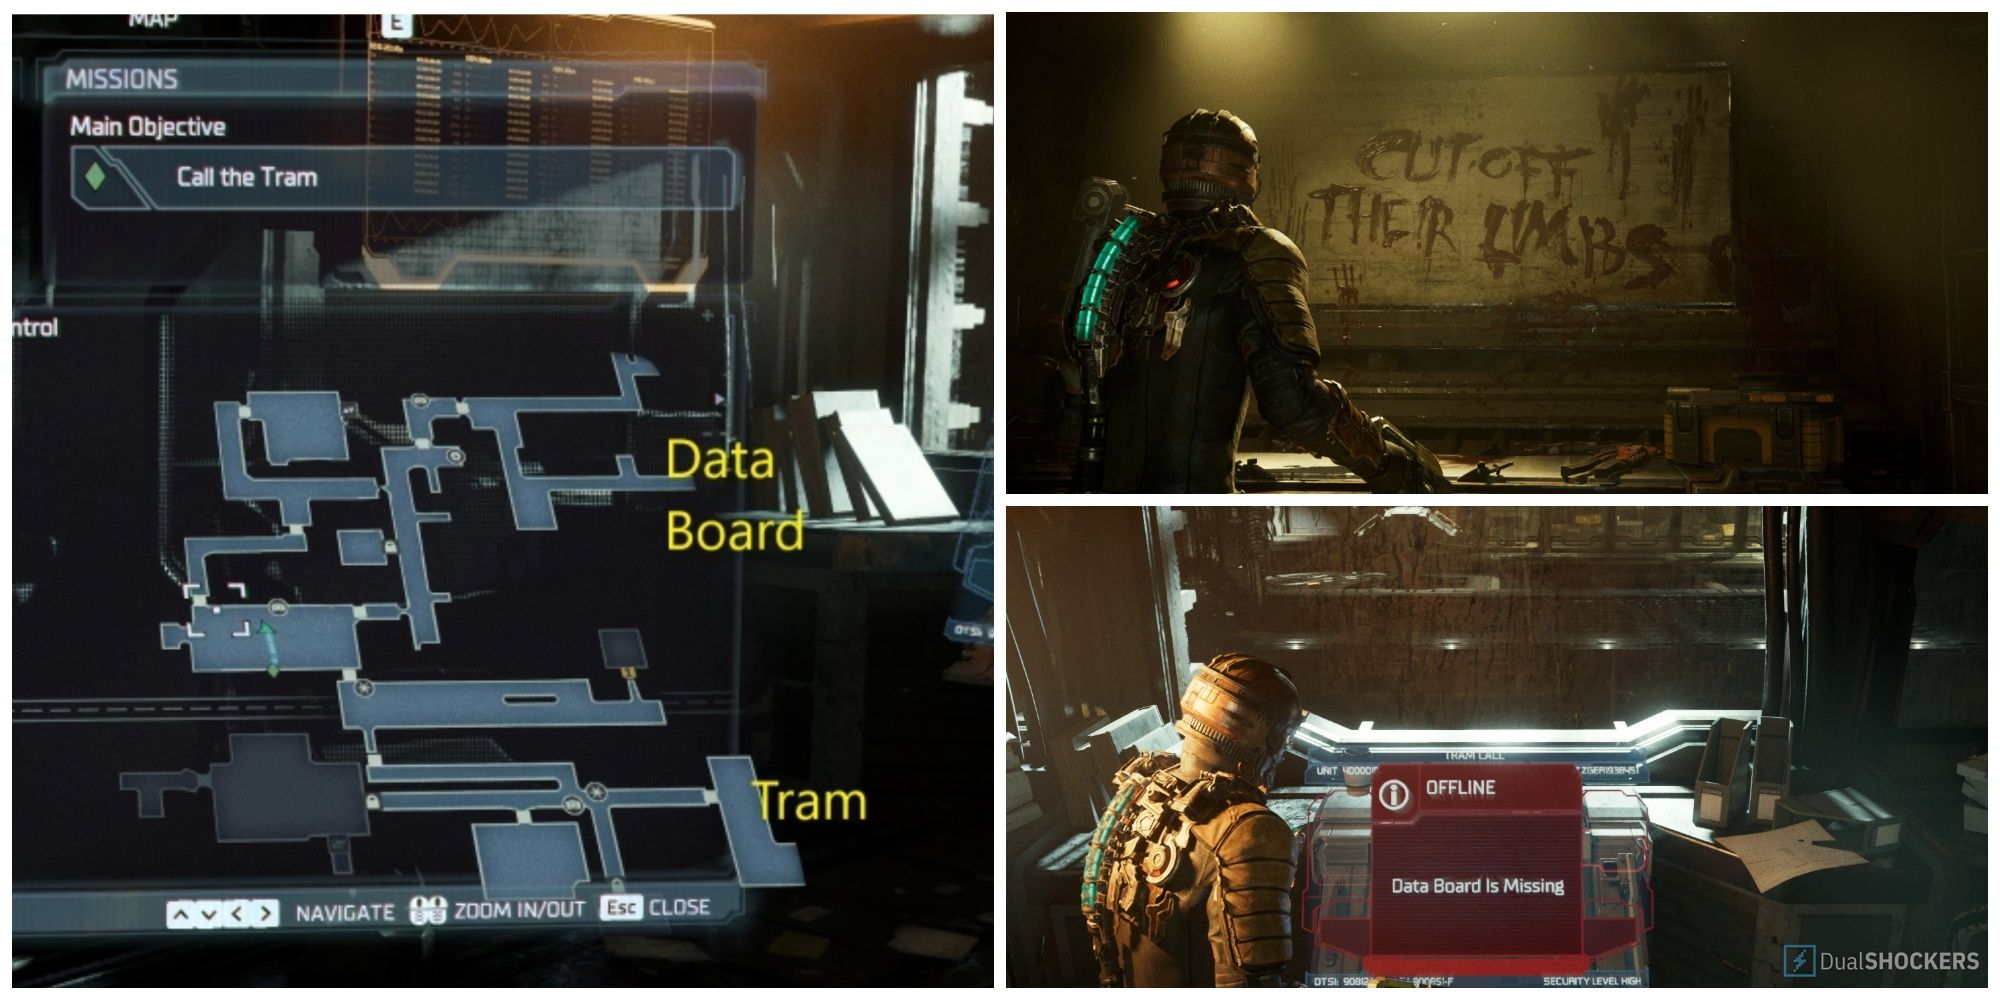 Split image Dead Space screenshot map screen, ominous message on wall and machinery requiring Data Board